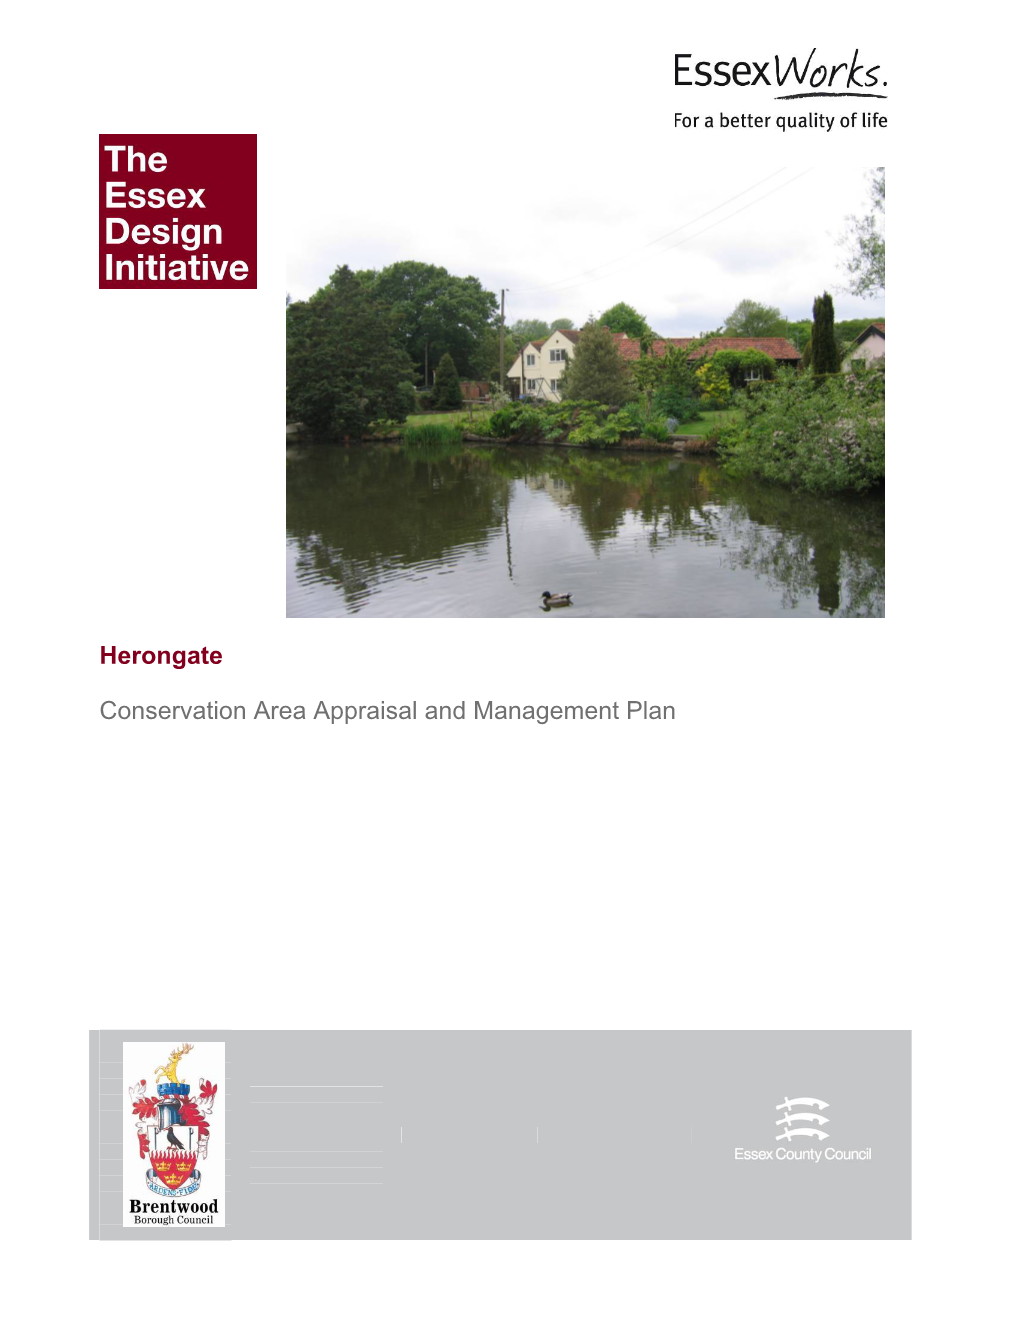 Herongate Conservation Area Appraisal and Management Plan